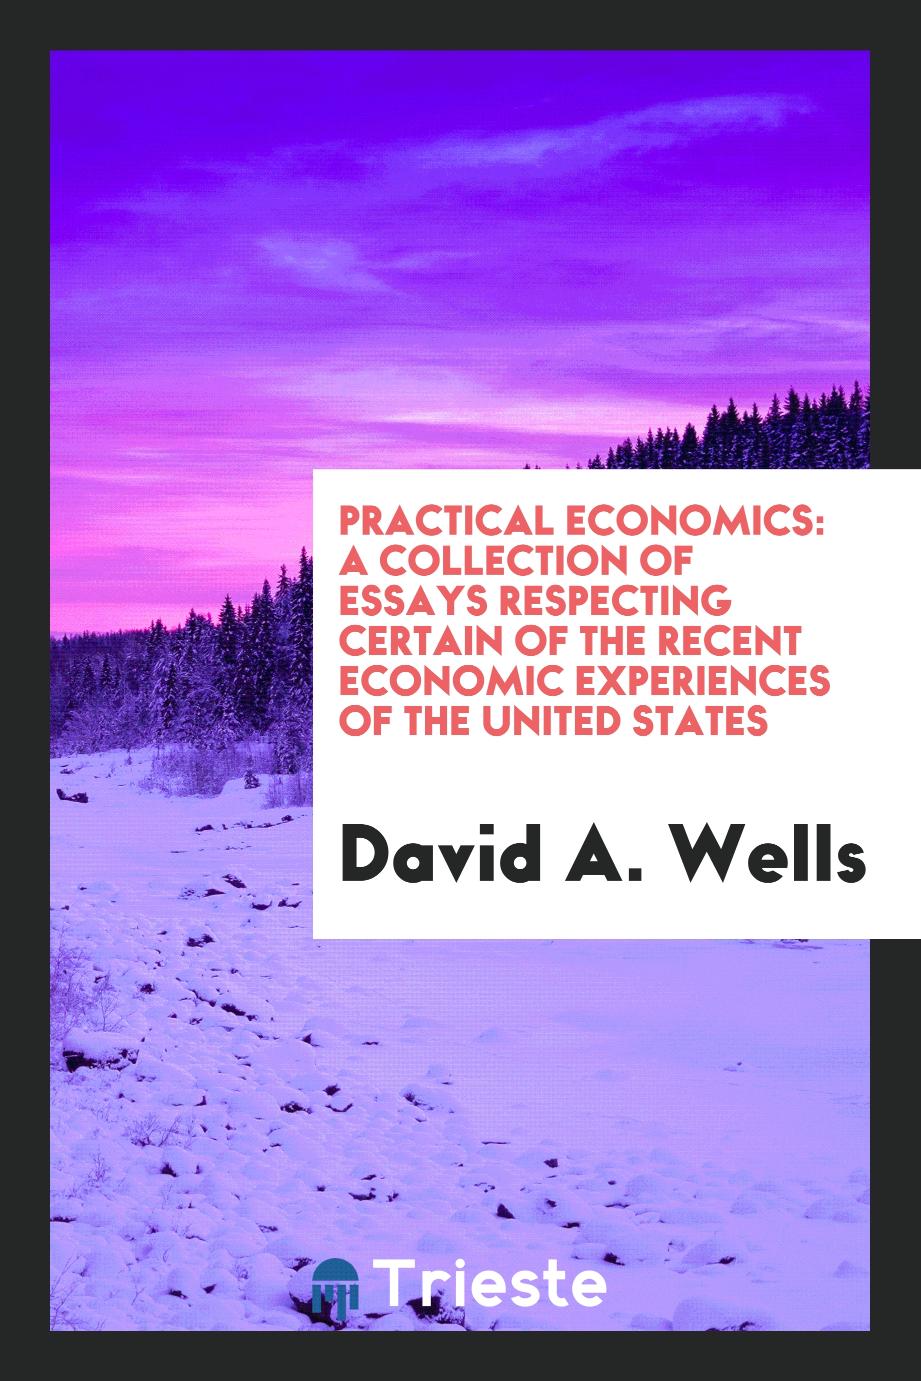 Practical Economics: A Collection of Essays Respecting Certain of the Recent Economic Experiences of the United States